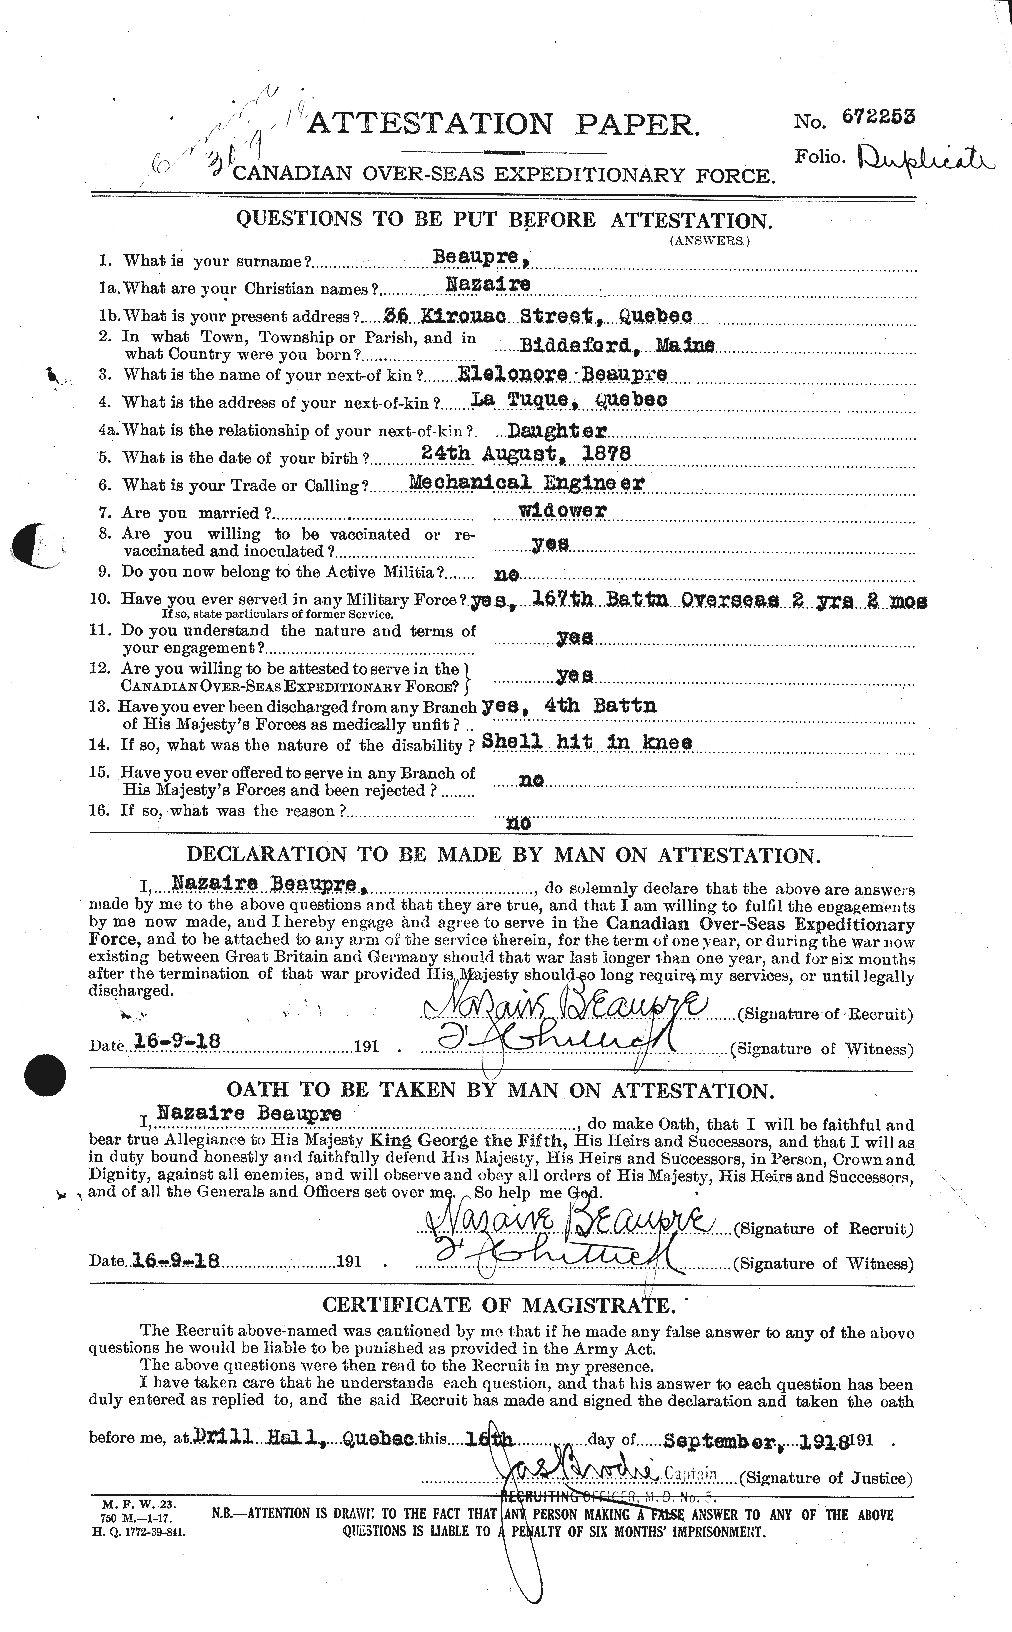 Personnel Records of the First World War - CEF 231770a